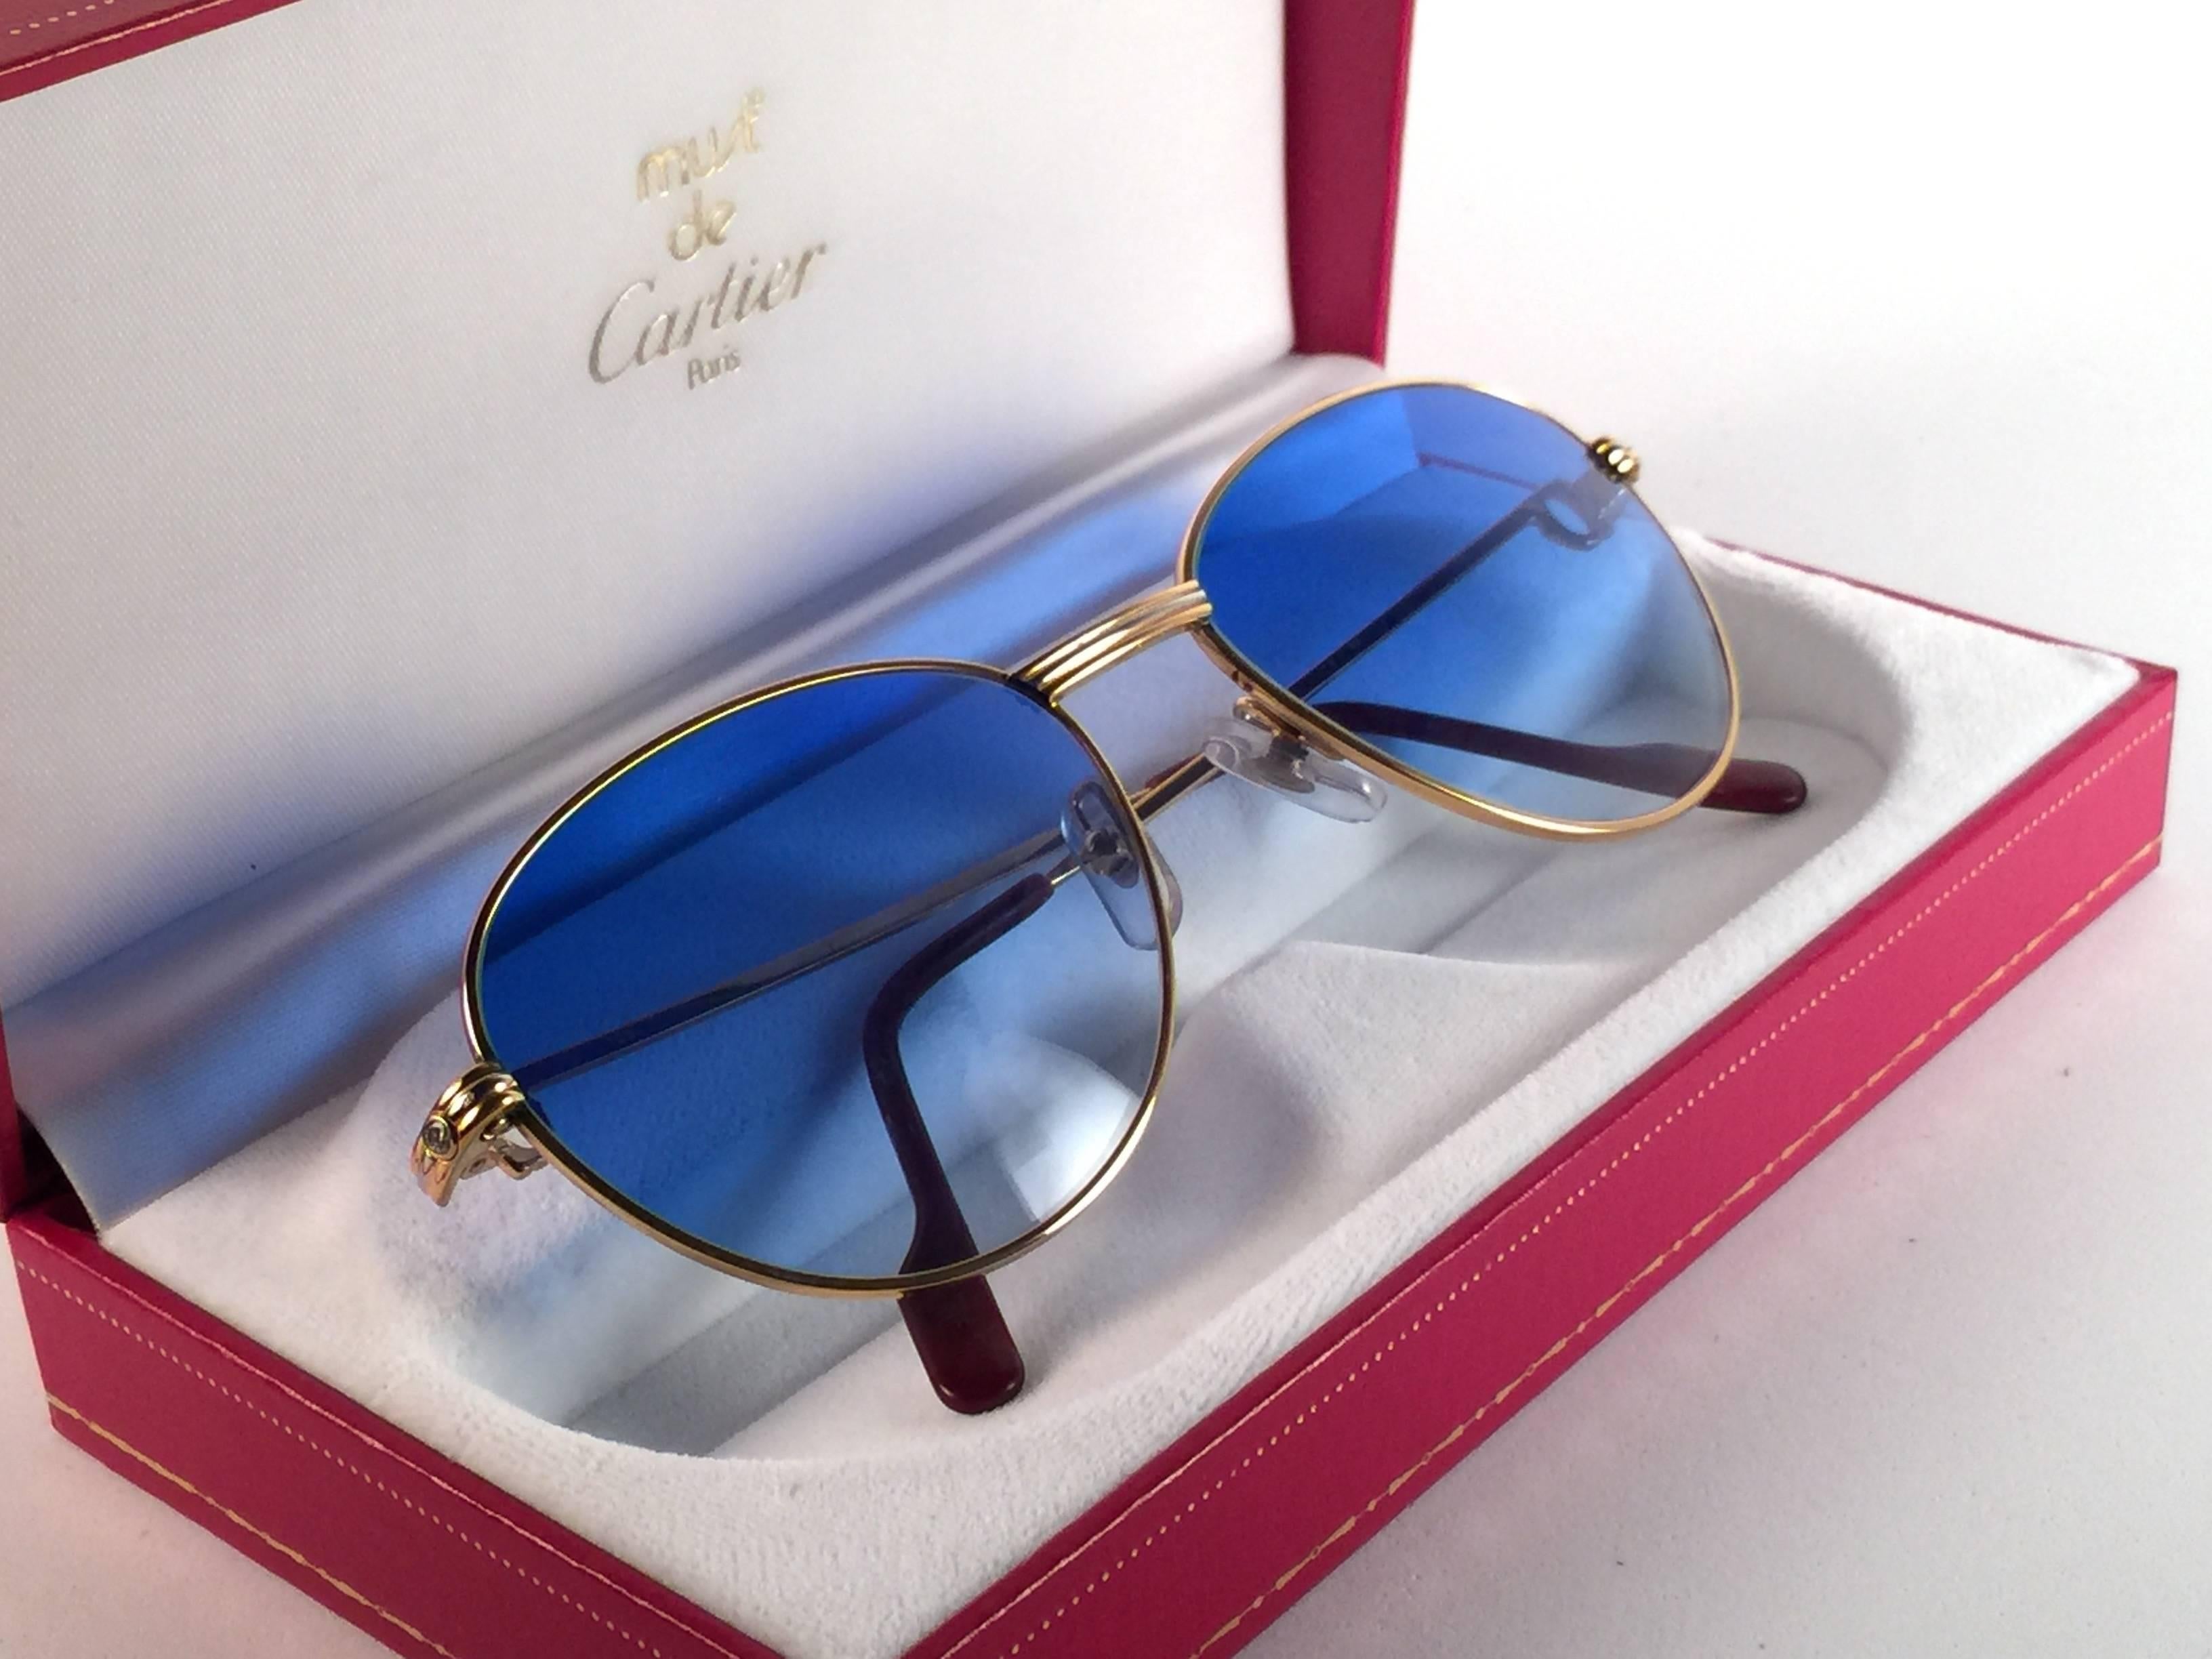 
In Excellent condition Cartier Louis Diamonds rounded sunglasses with 2 real diamonds on the side of the frame. Blue gradient (uv protection) lenses. Frame is with the famous yellow and white gold accents on the front and on both sides. All